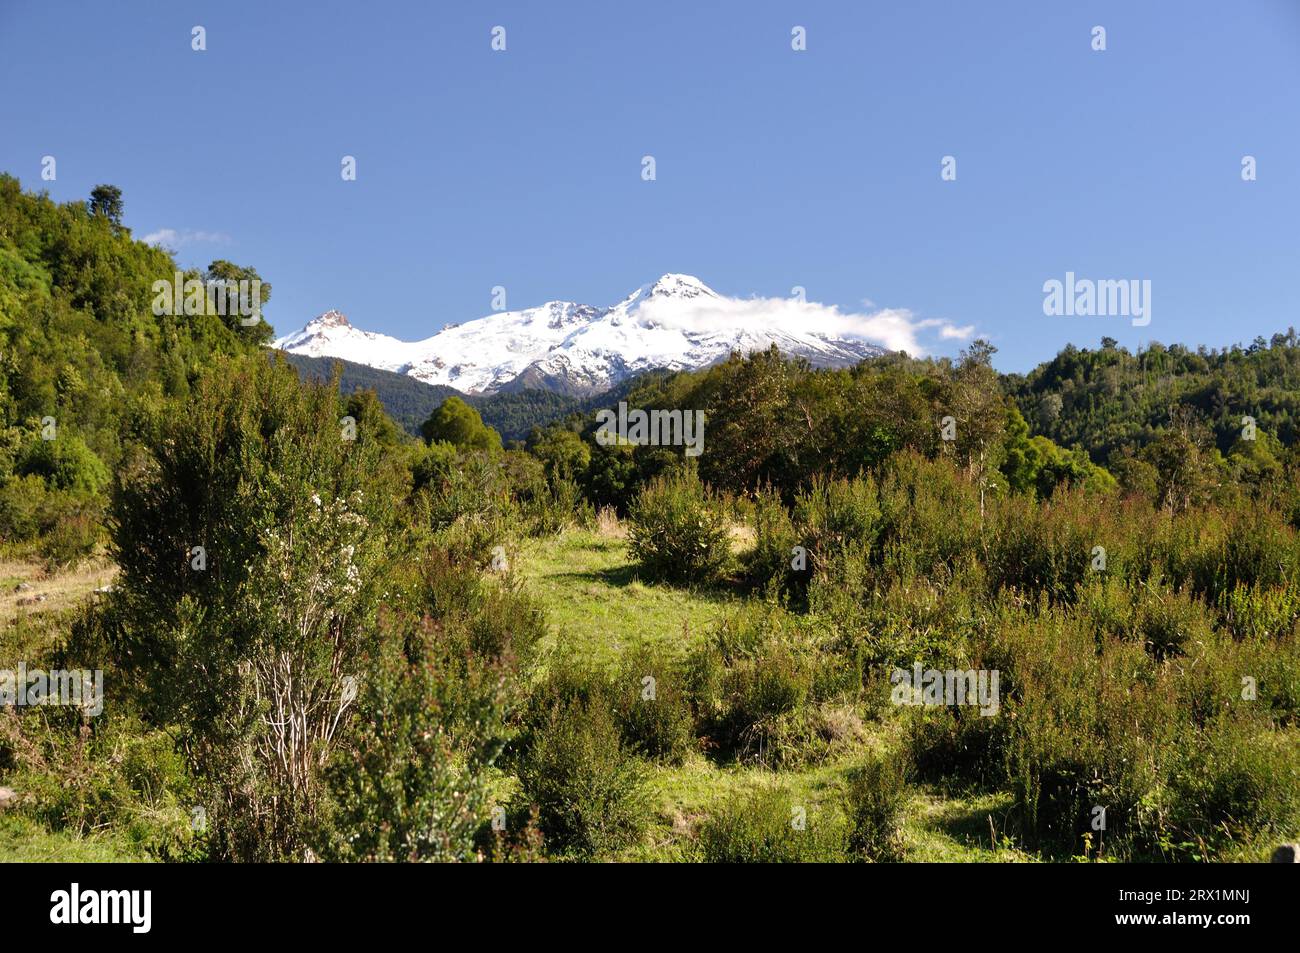 The summit of the snow-capped volcano Yate, Patagonia, Chile Stock Photo